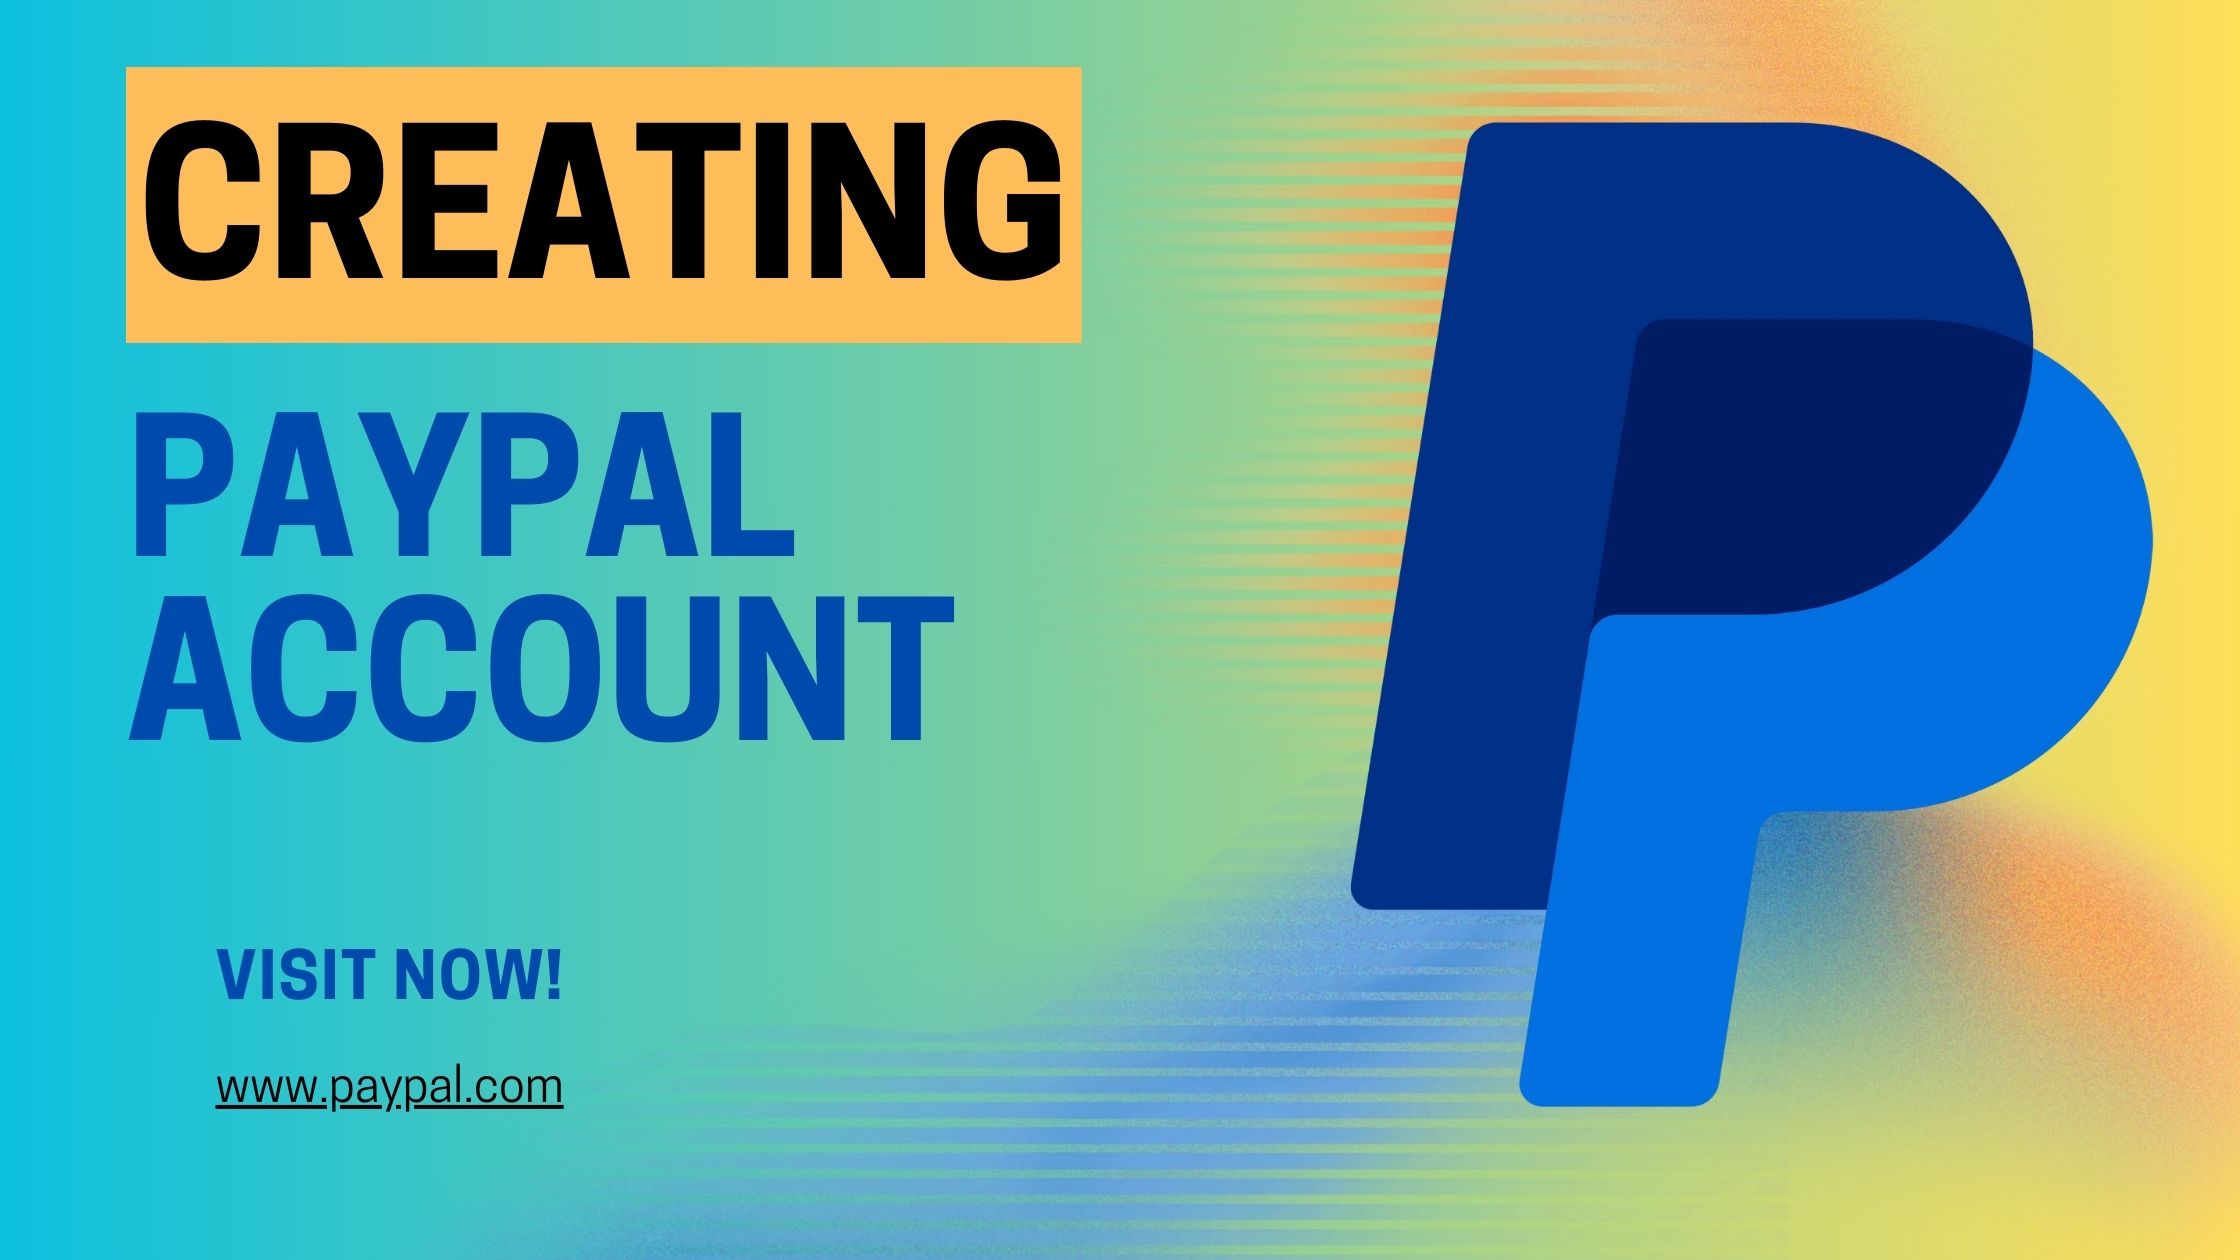 PayPal Account Creation